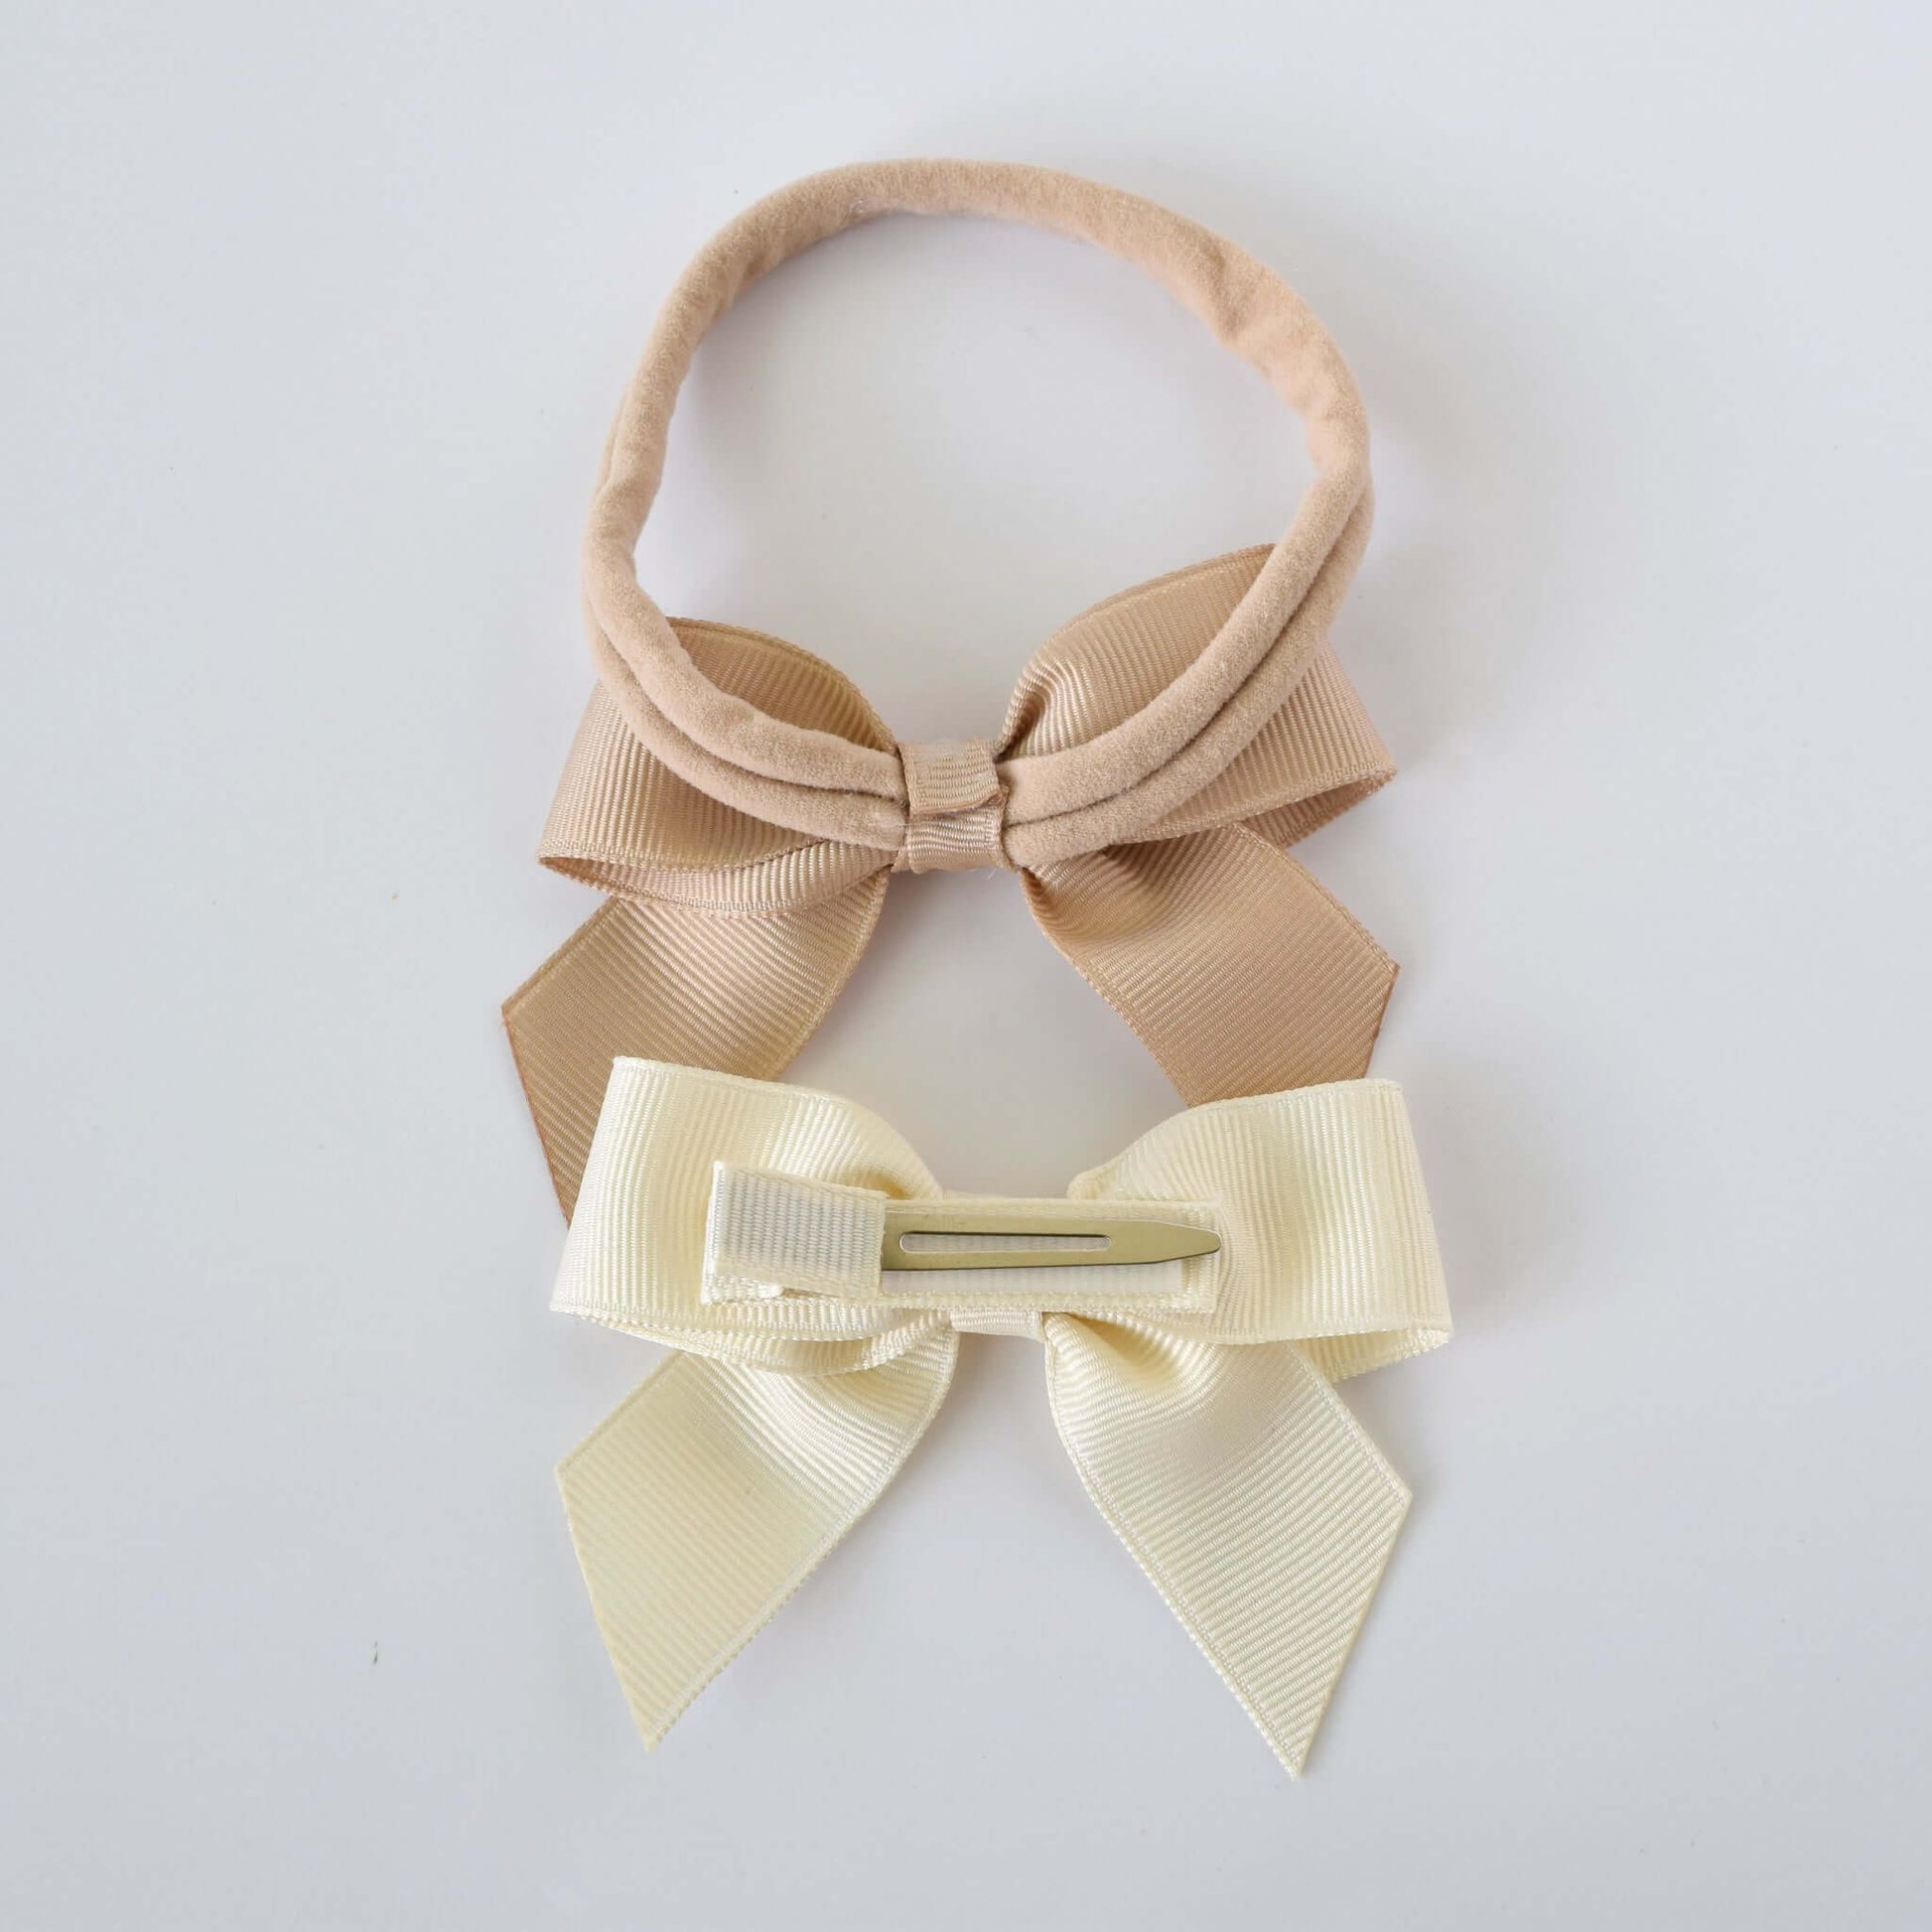 Taupe grosgrain sailor bow headband and ivory bow clip for babies, toddlers, and little girls – 3-inch accessories.